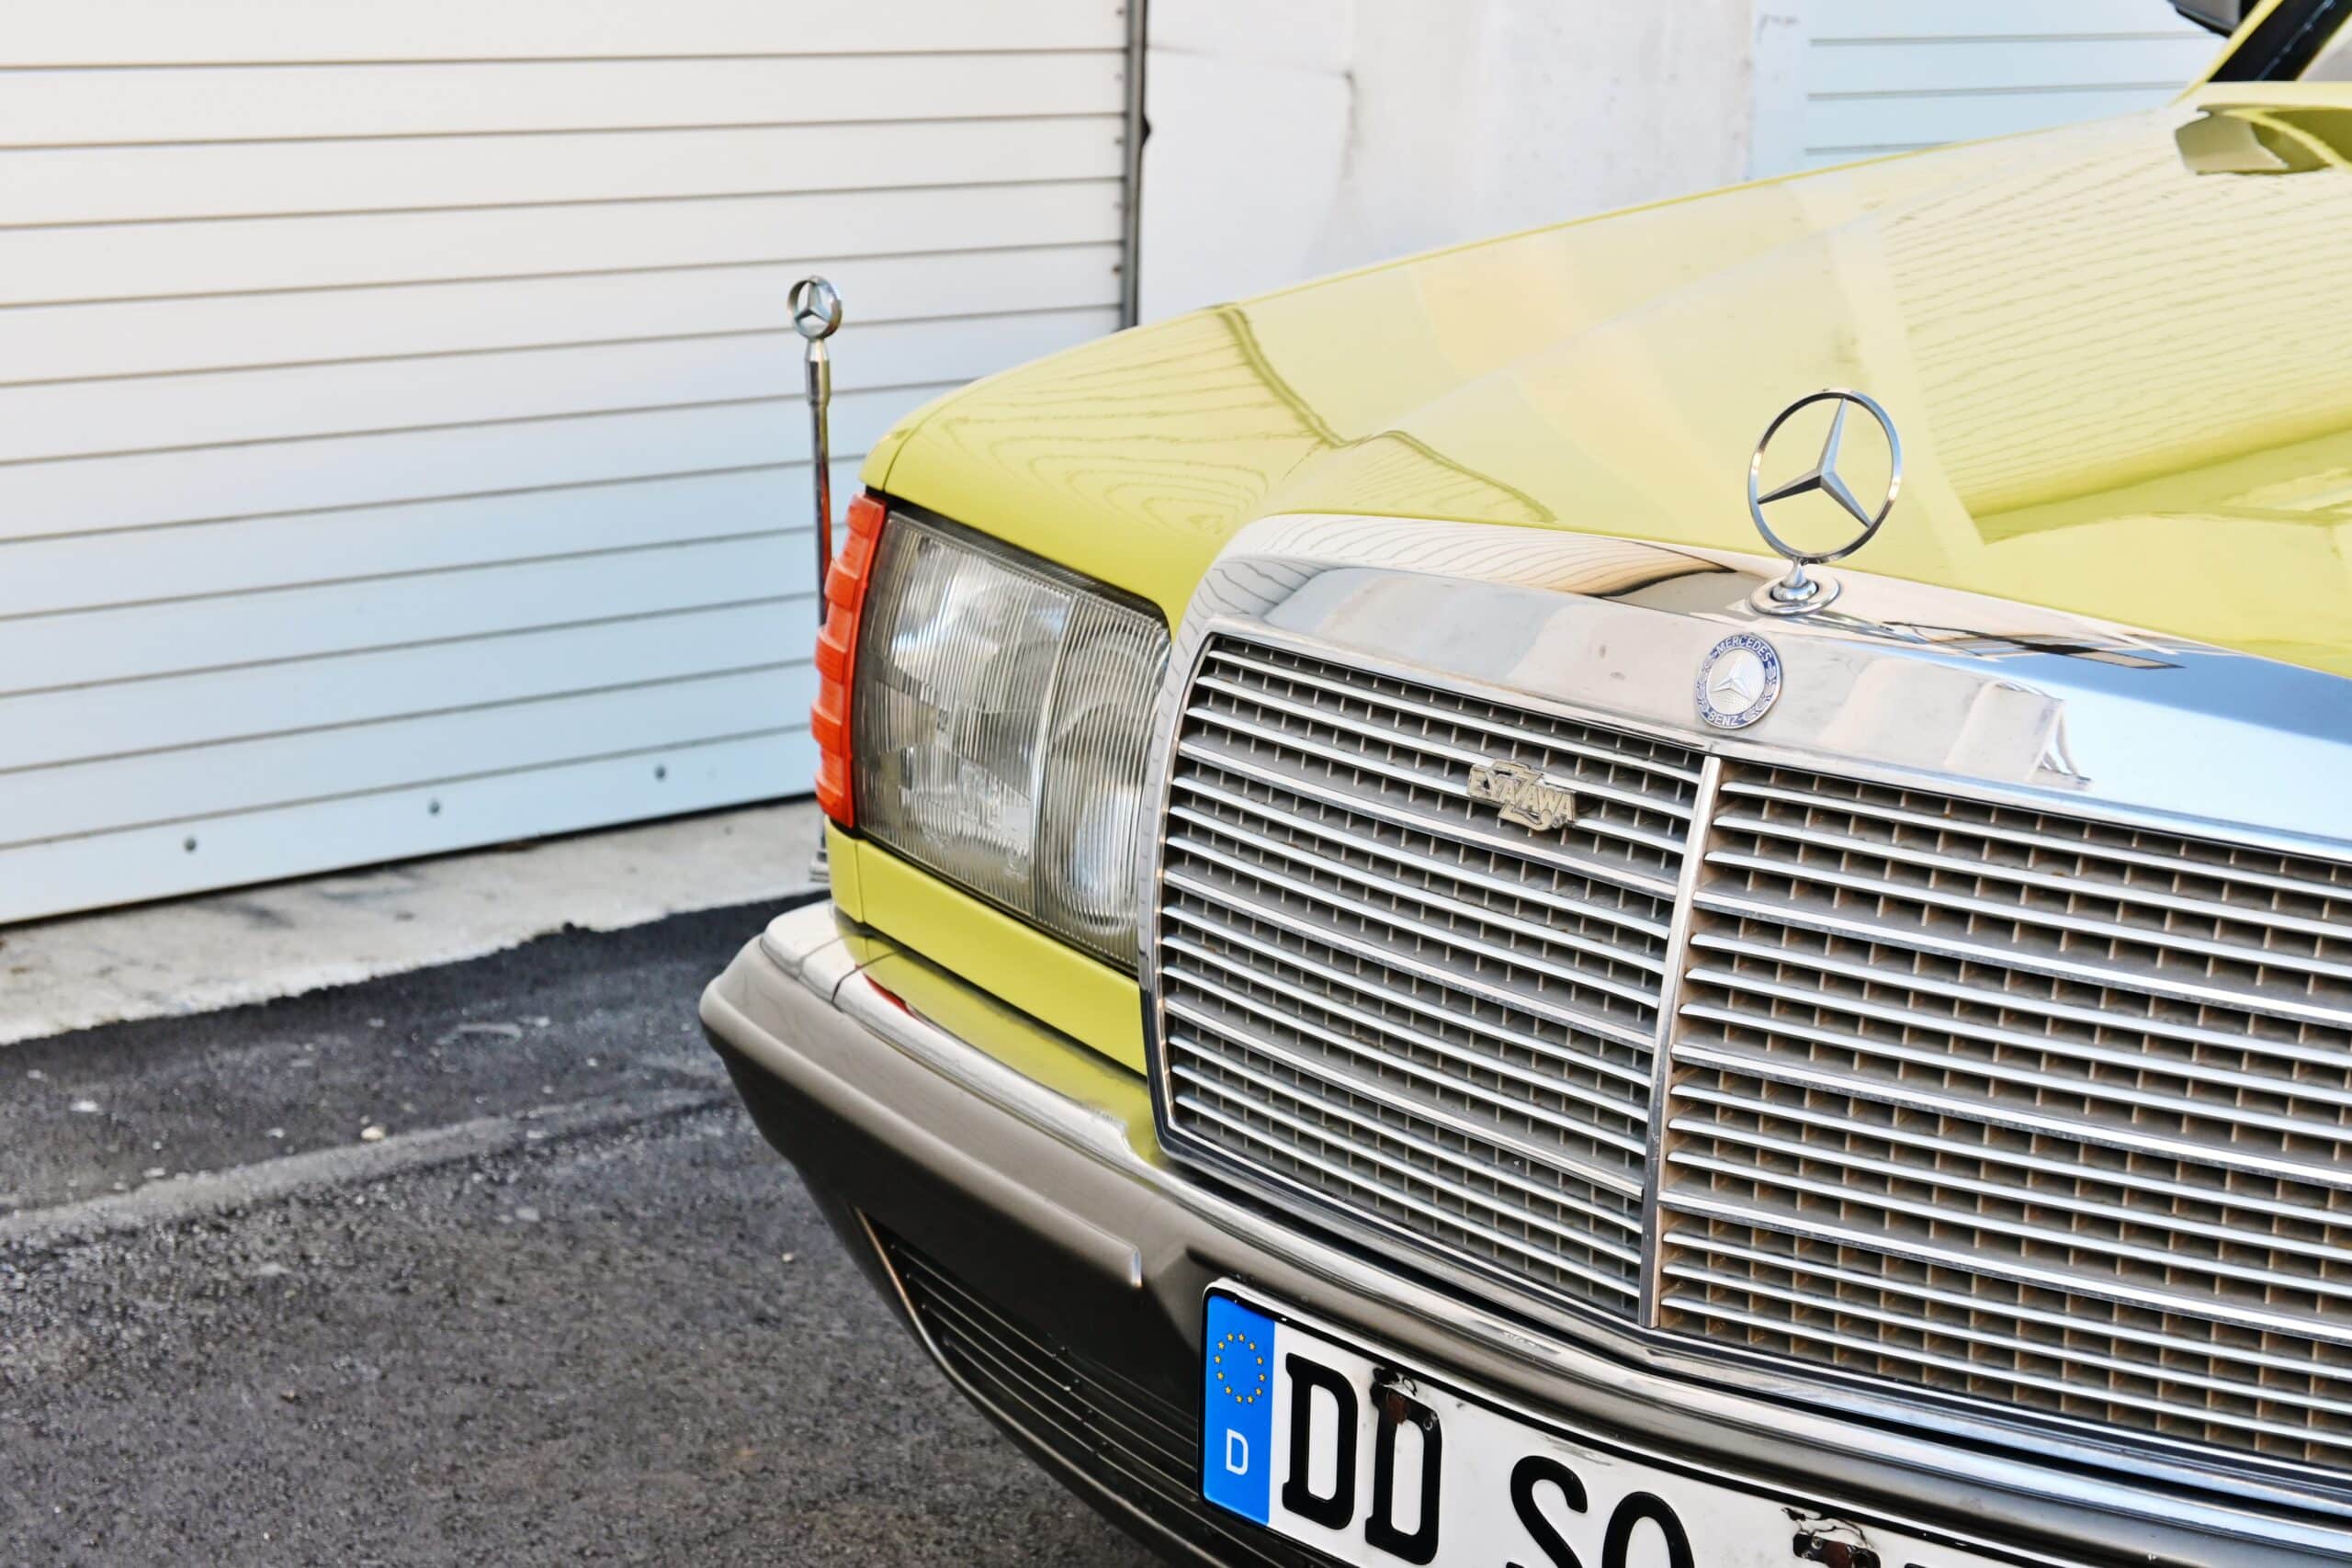 1981 Mercedes-Benz S-Class Euro 280 SE Lorinser W126 in rare Mimosa Yellow -Low Miles – BBS Wheels – Lorinser Exhaust/Suspension